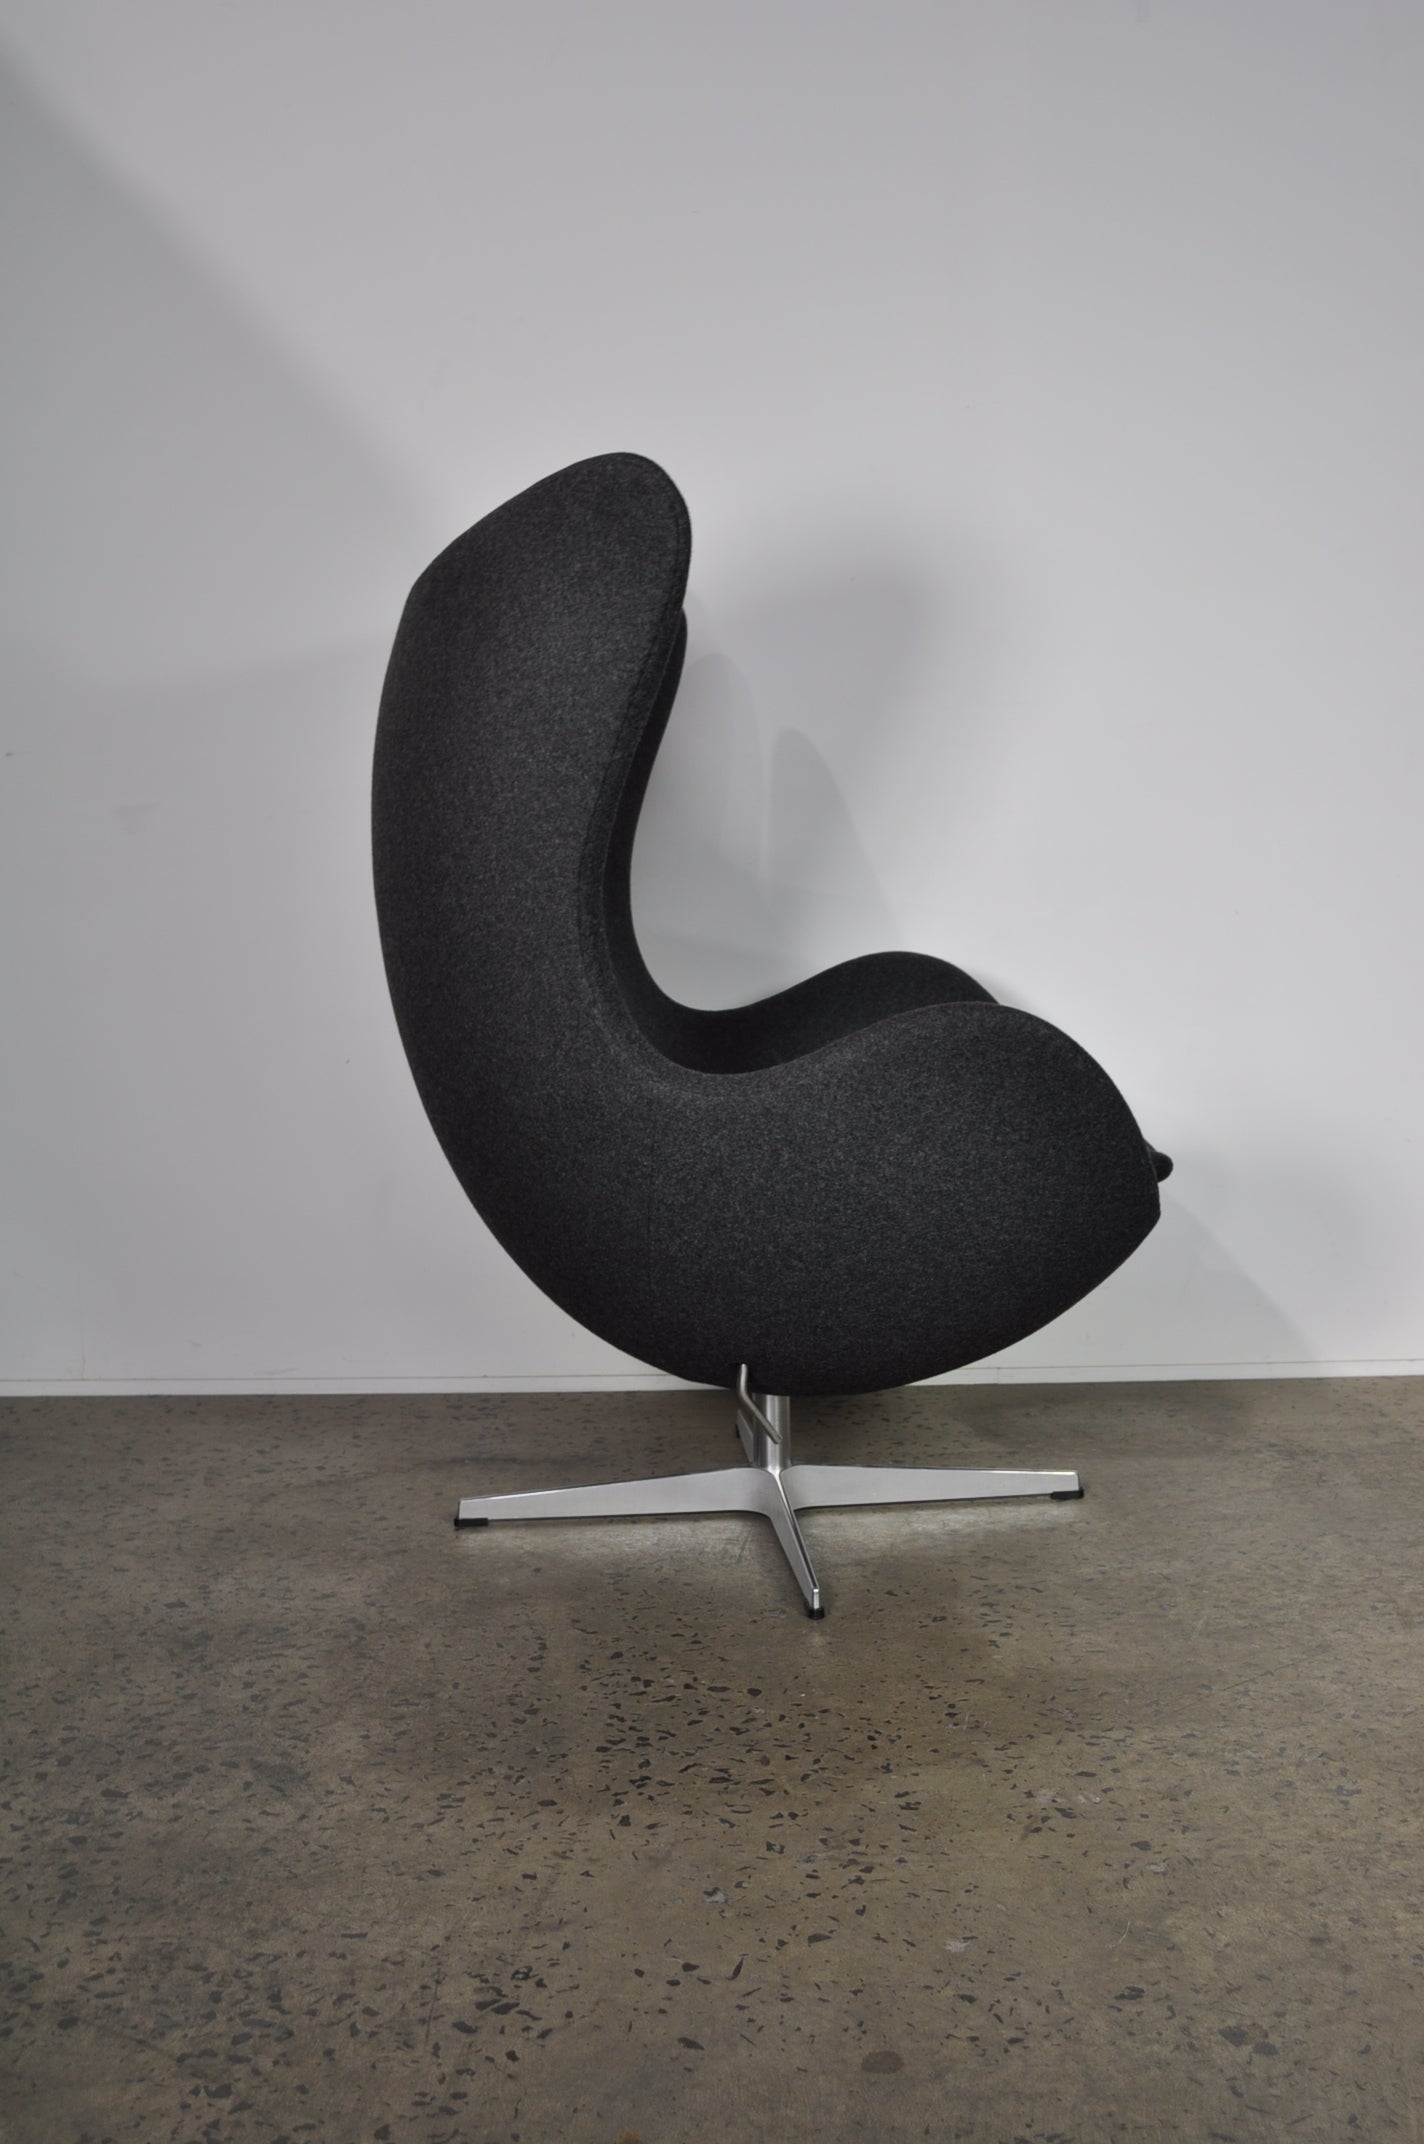 The Egg chair and Ottoman by Arne Jacobsen and Fritz Hansen.